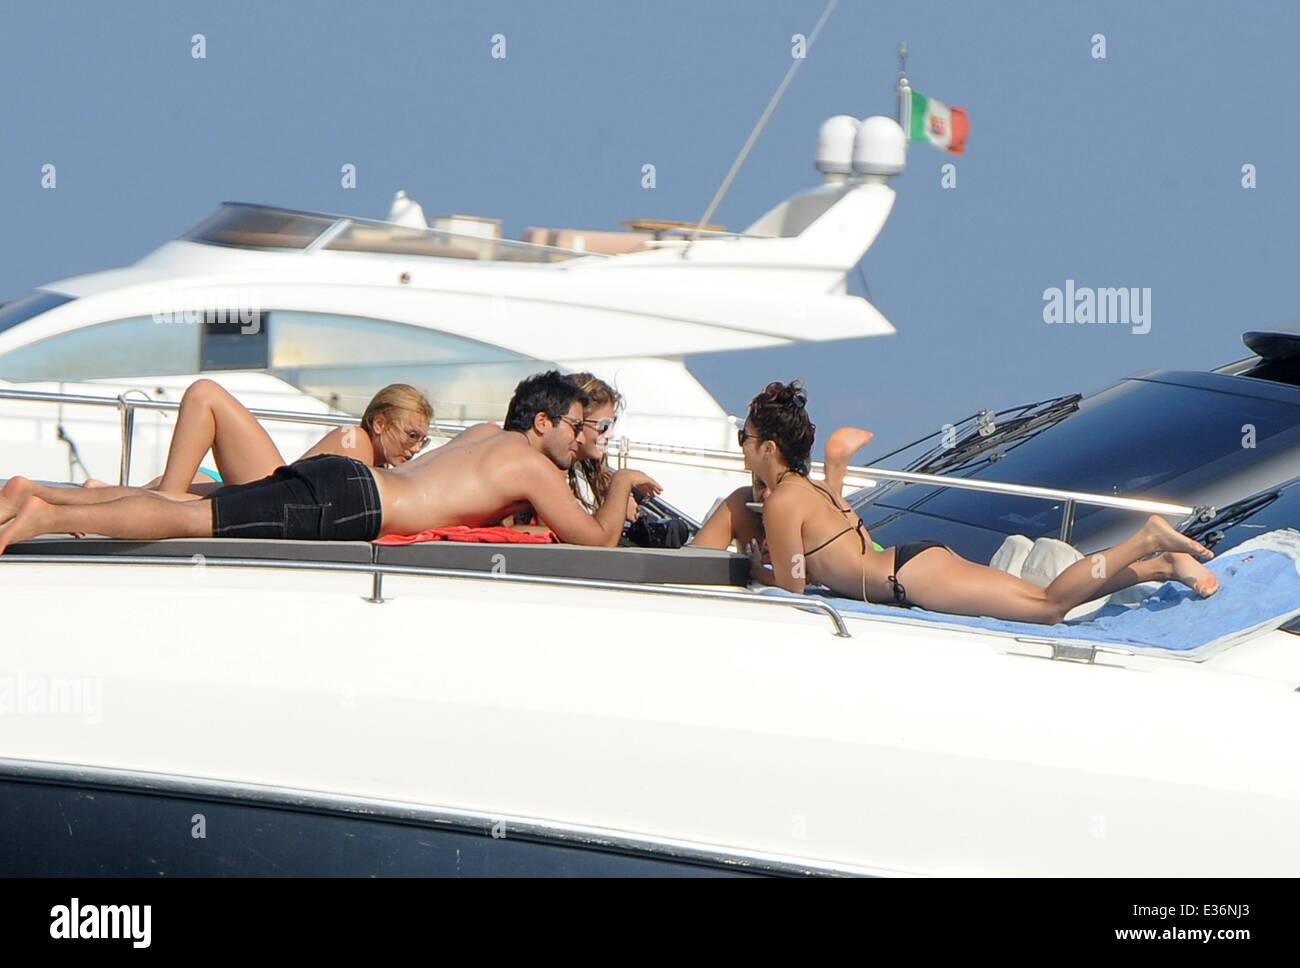 Vanessa Hudgens spends time on a boat with friends, including film directors Eli Roth and Terry Gilliam.  Featuring: Vanessa Hud Stock Photo